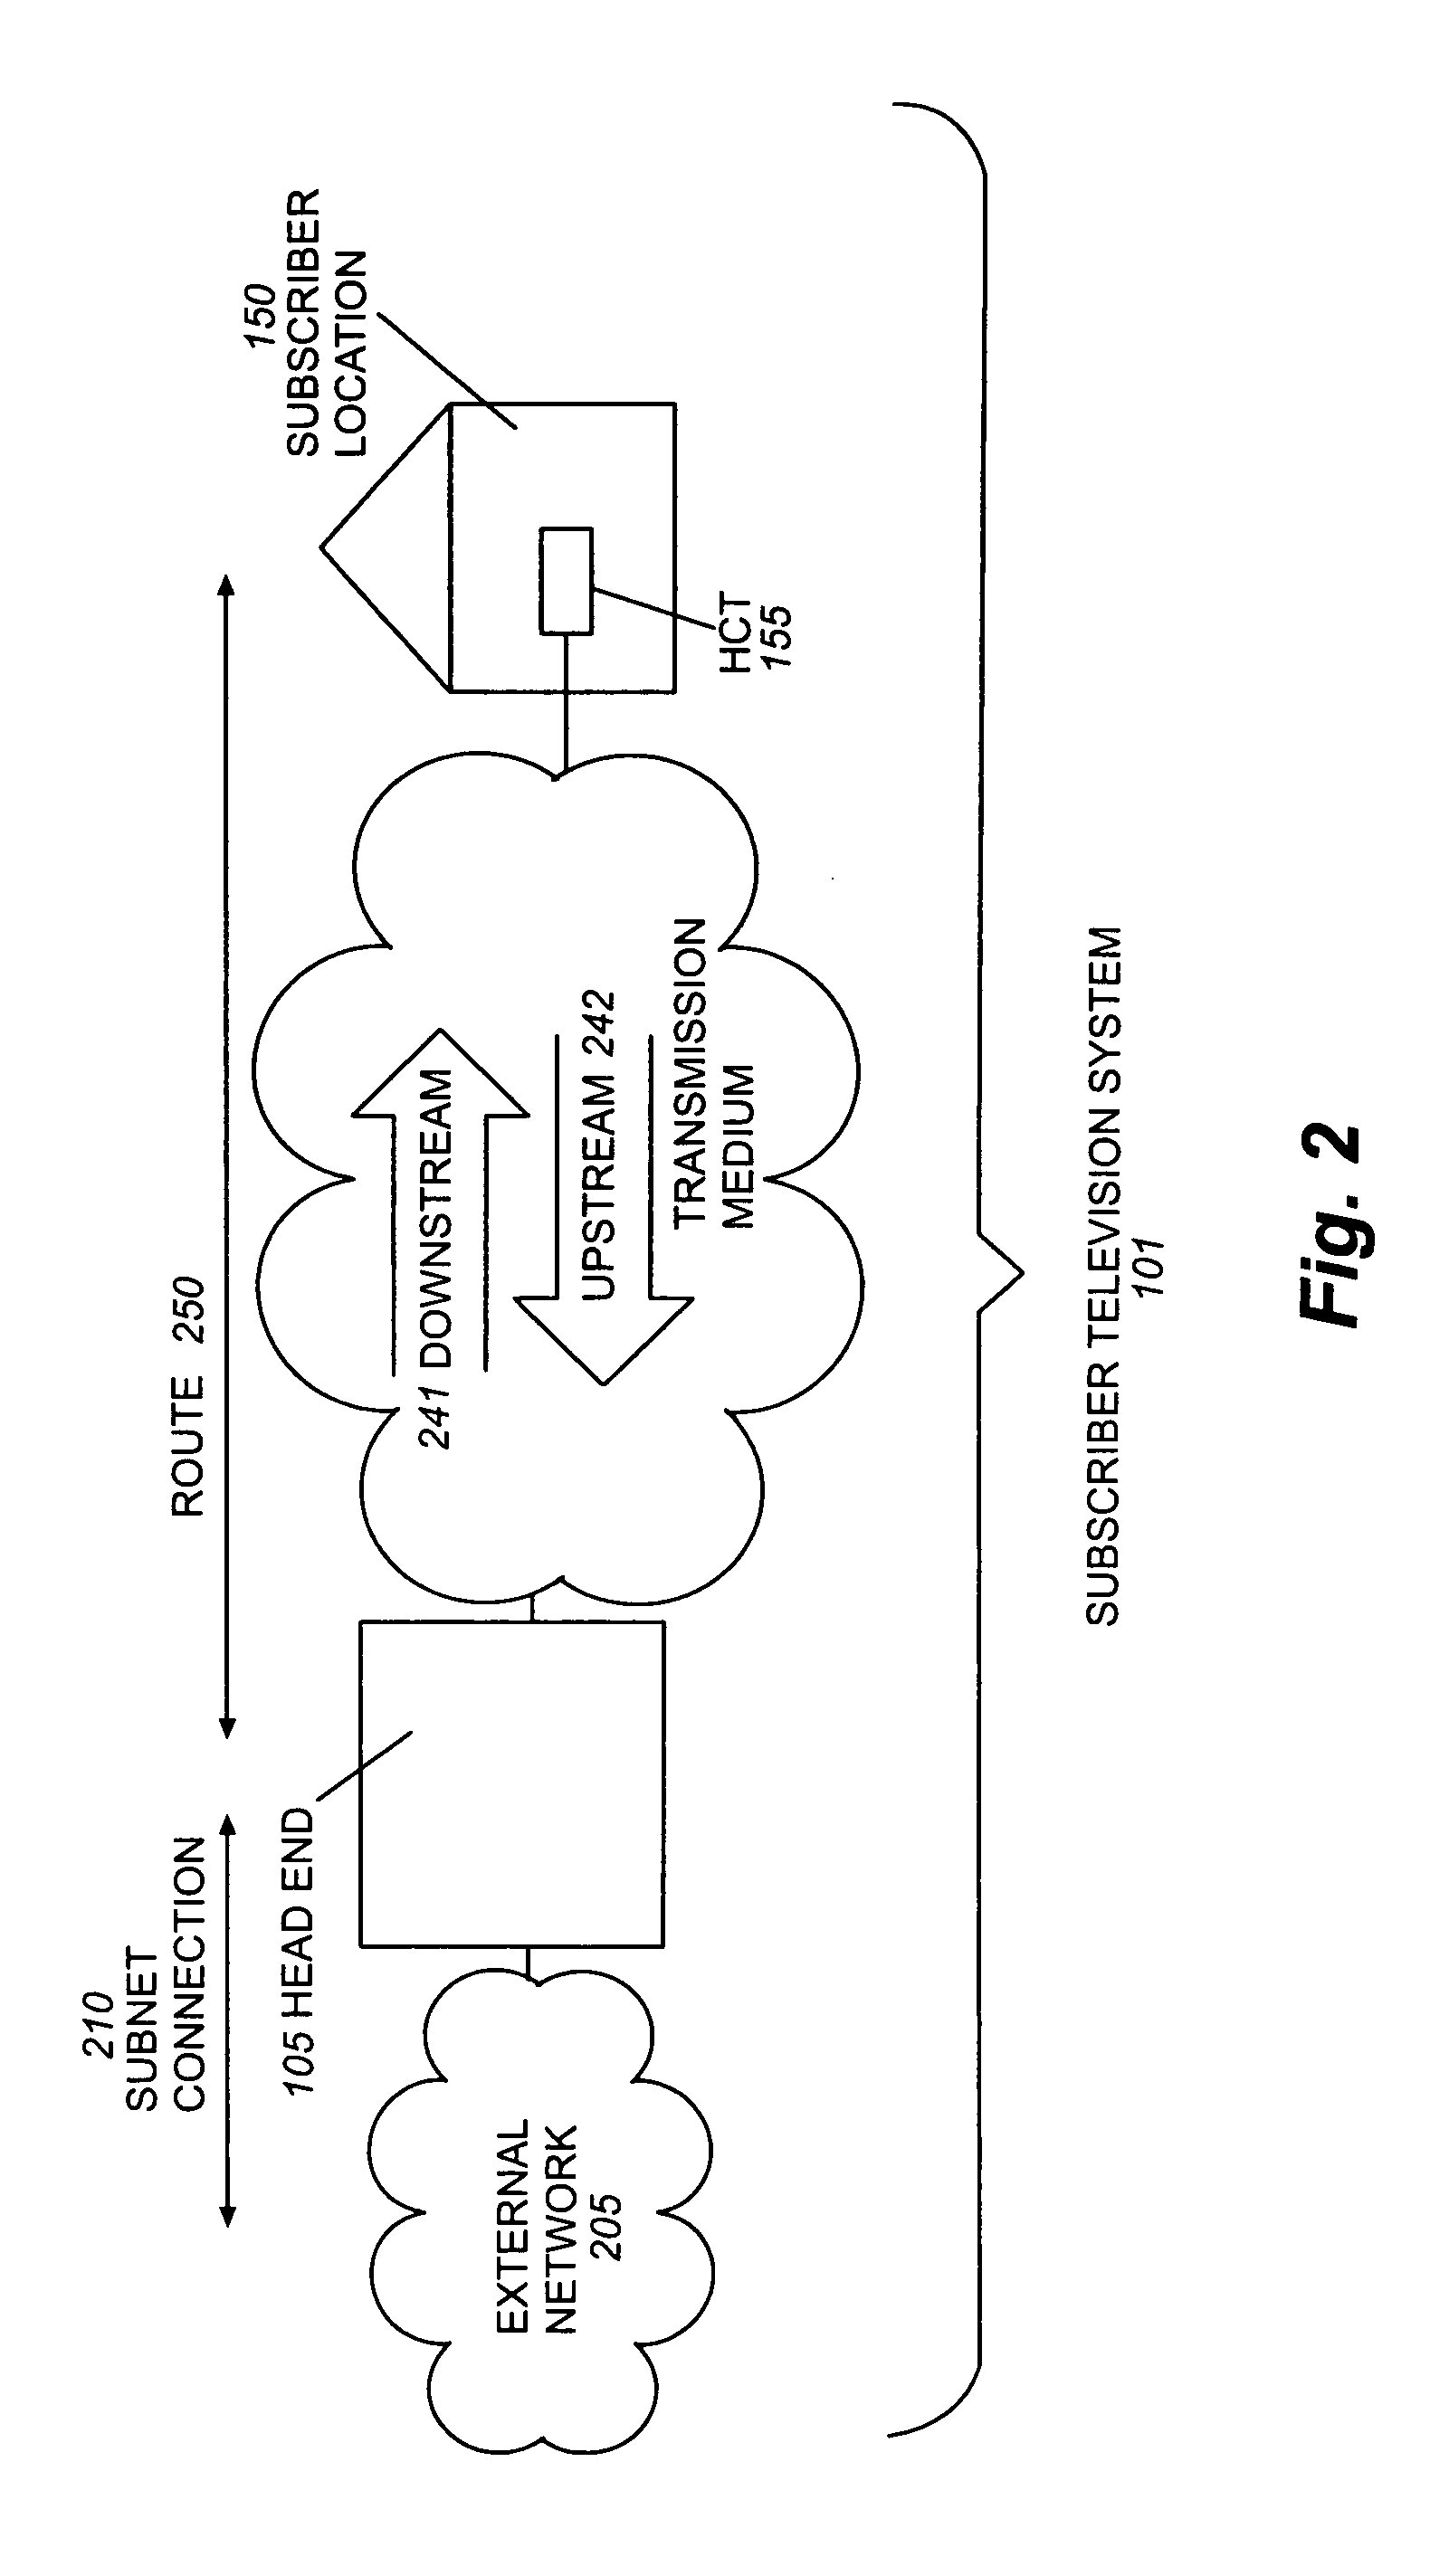 Method for delivery of IP data over MPEG-2 transport networks